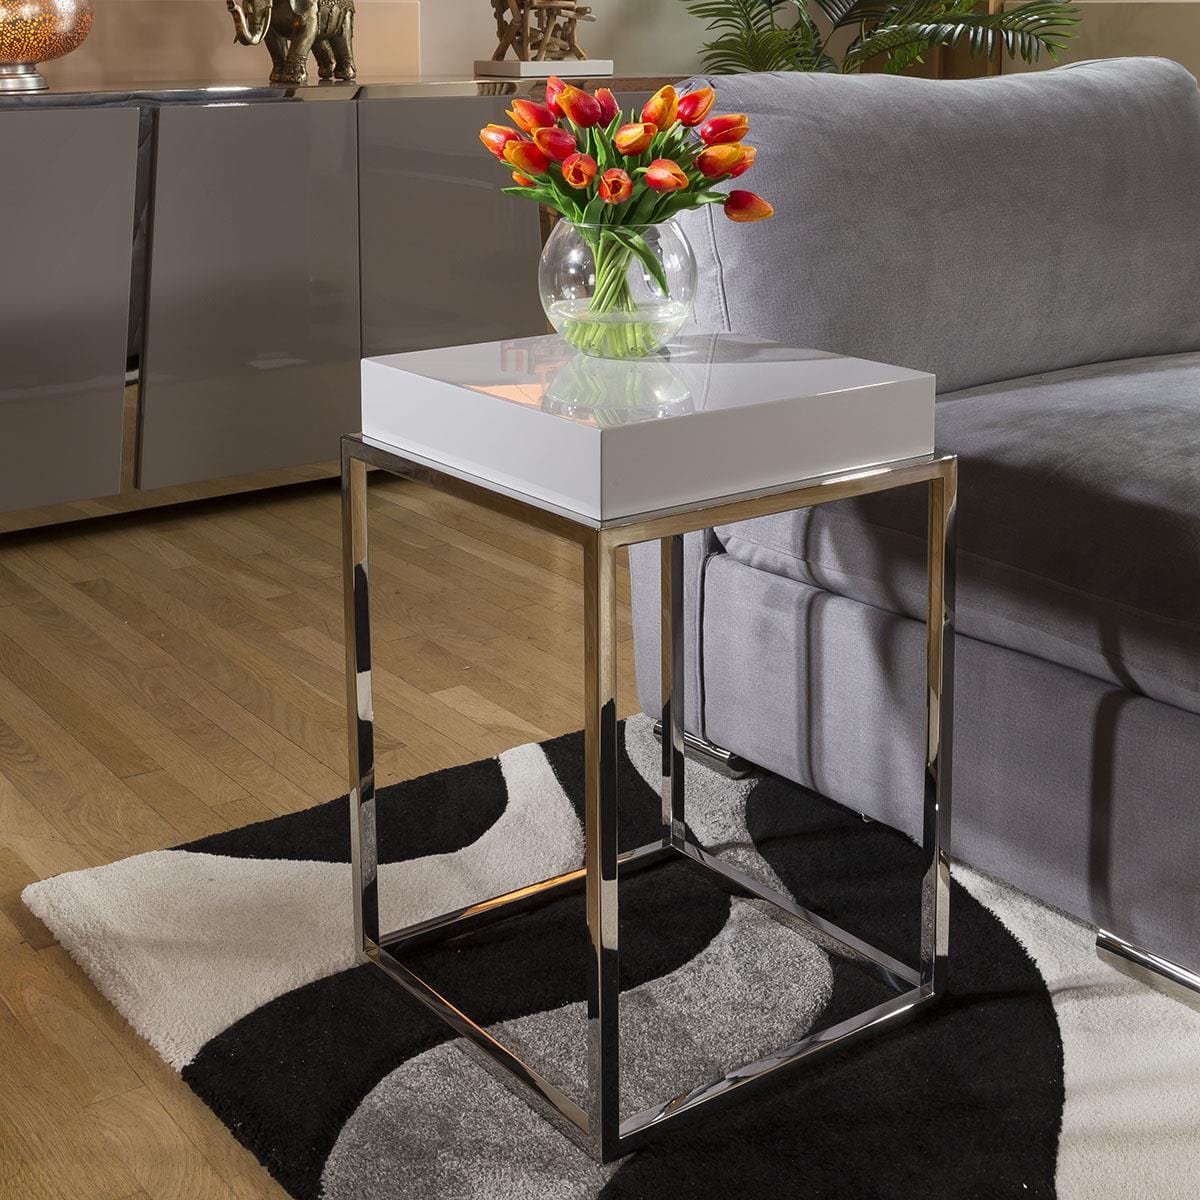 Quatropi Stainless Steel Framed 410mm Wide End Table Grey Gloss Wood Top